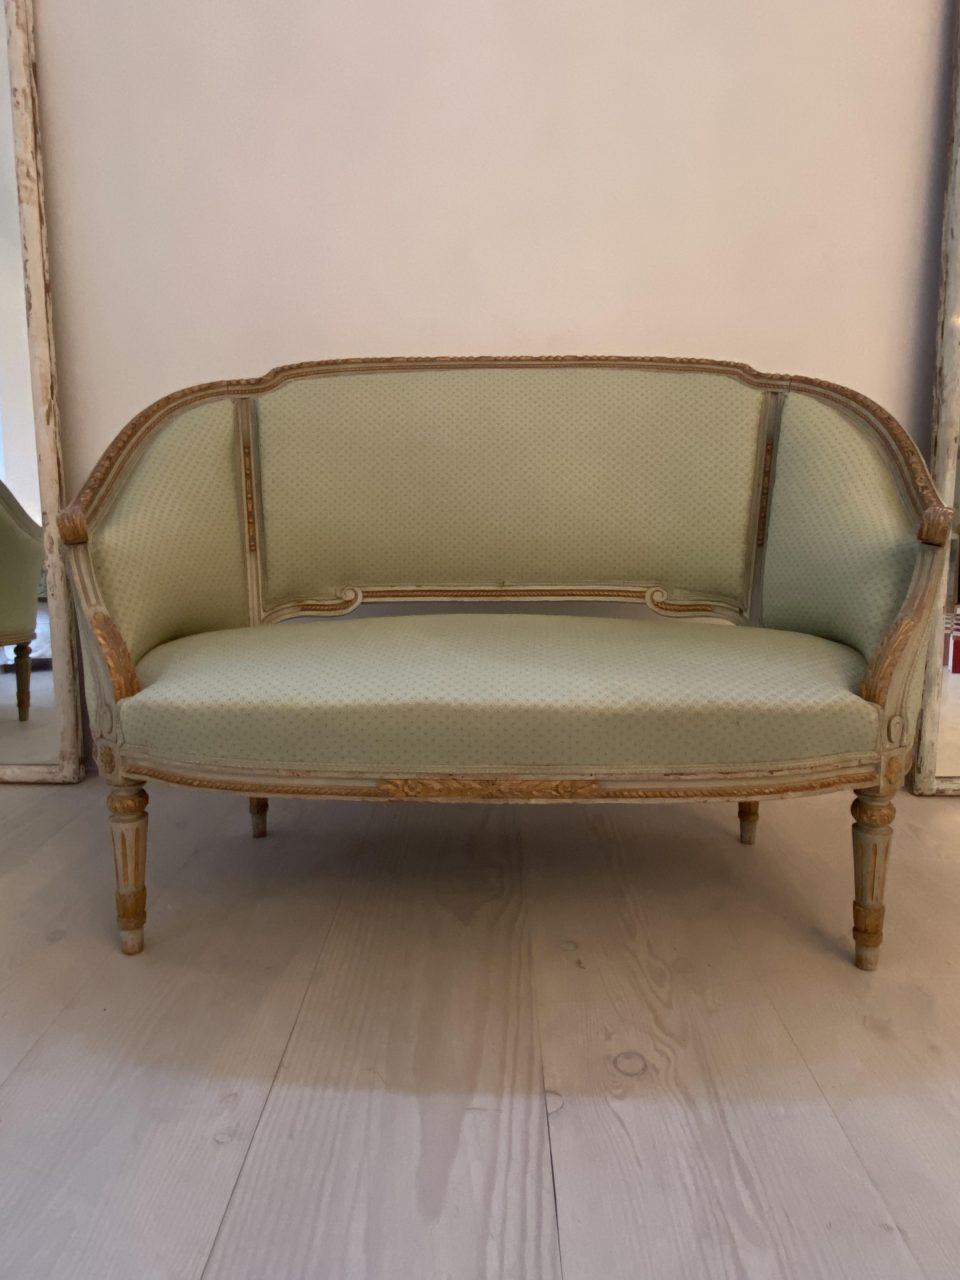 Lovely and comfortable old French Bergère sofa, in Louis Seize style with newer pistachio green upholstery. Bergére sofas date back to 18th century France, and are characterized by being slightly more compact pieces of seating furniture. Bergére